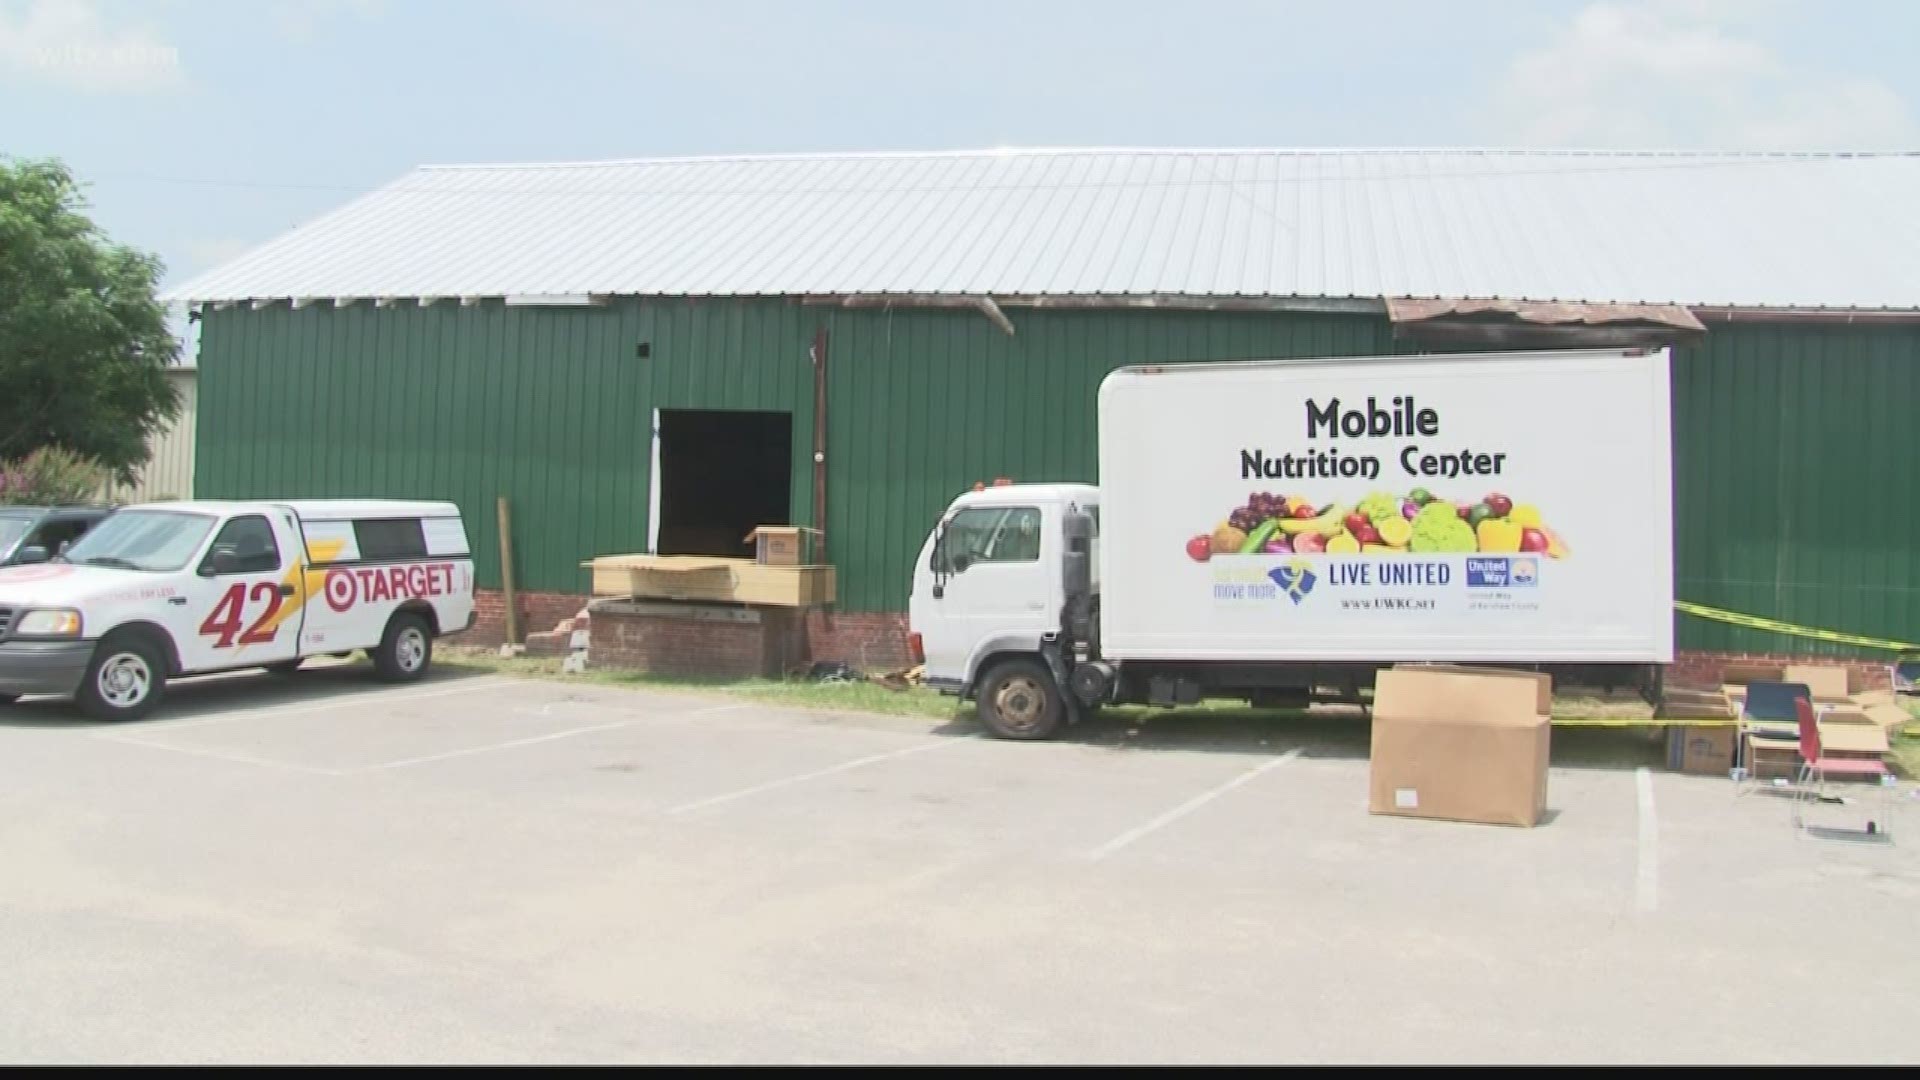 Created in 2017, the Mobile Nutrition Center (MNC) is a mobile food pantry that delivers healthy foods to sites in food deserts located in rural Kershaw County, SC.